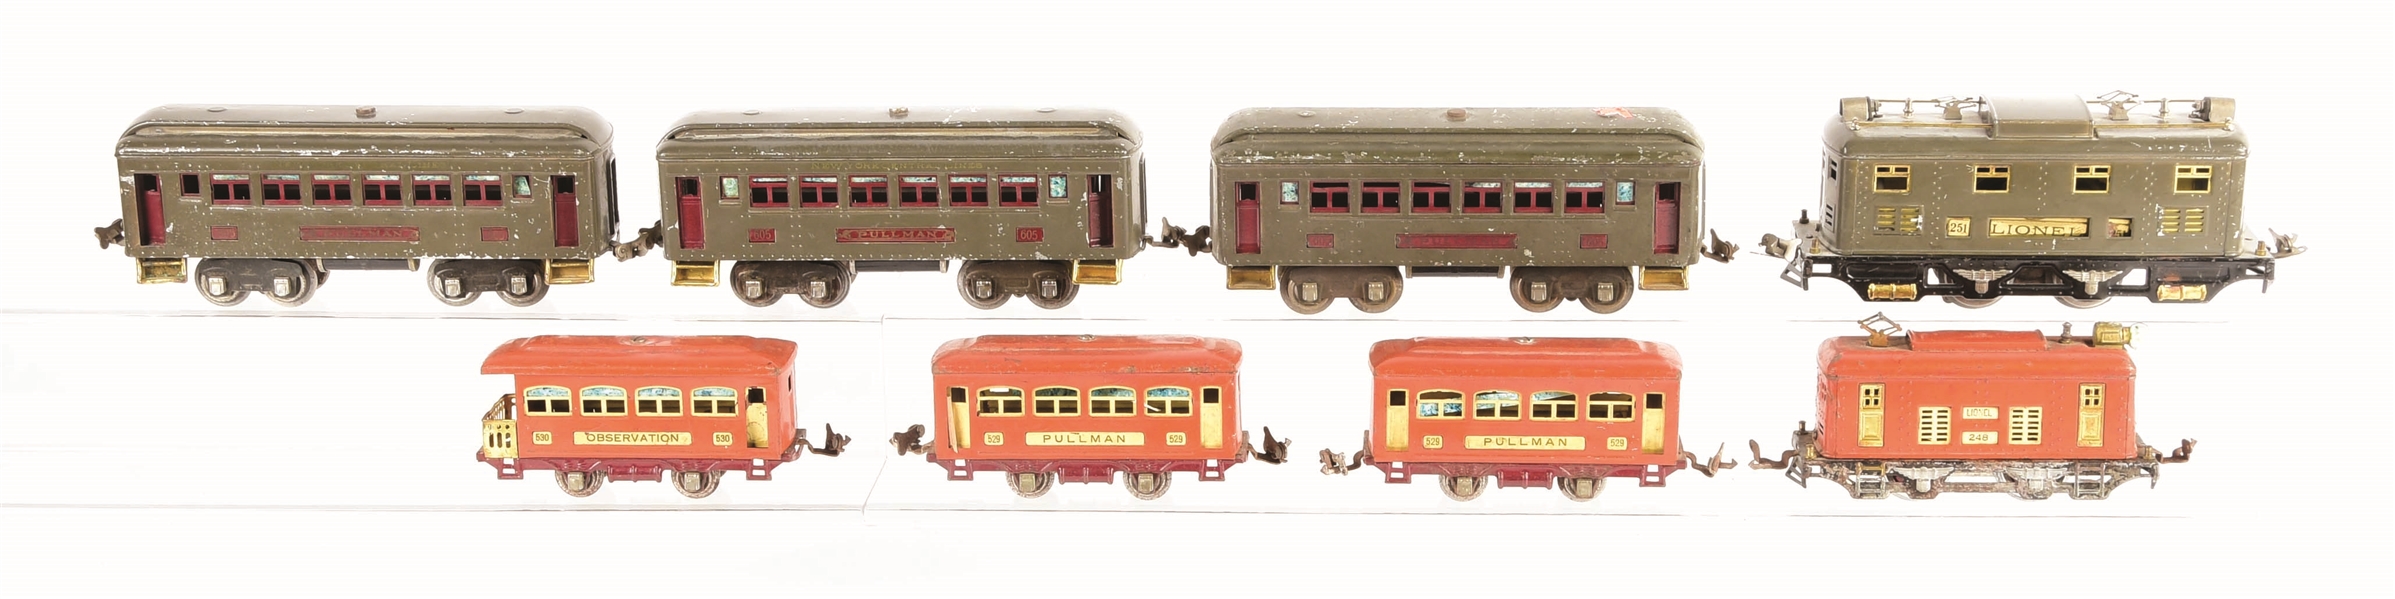 LIONEL NO. 251 SET WITH THREE CARS & A NO. 248 SET WITH THREE CARS.